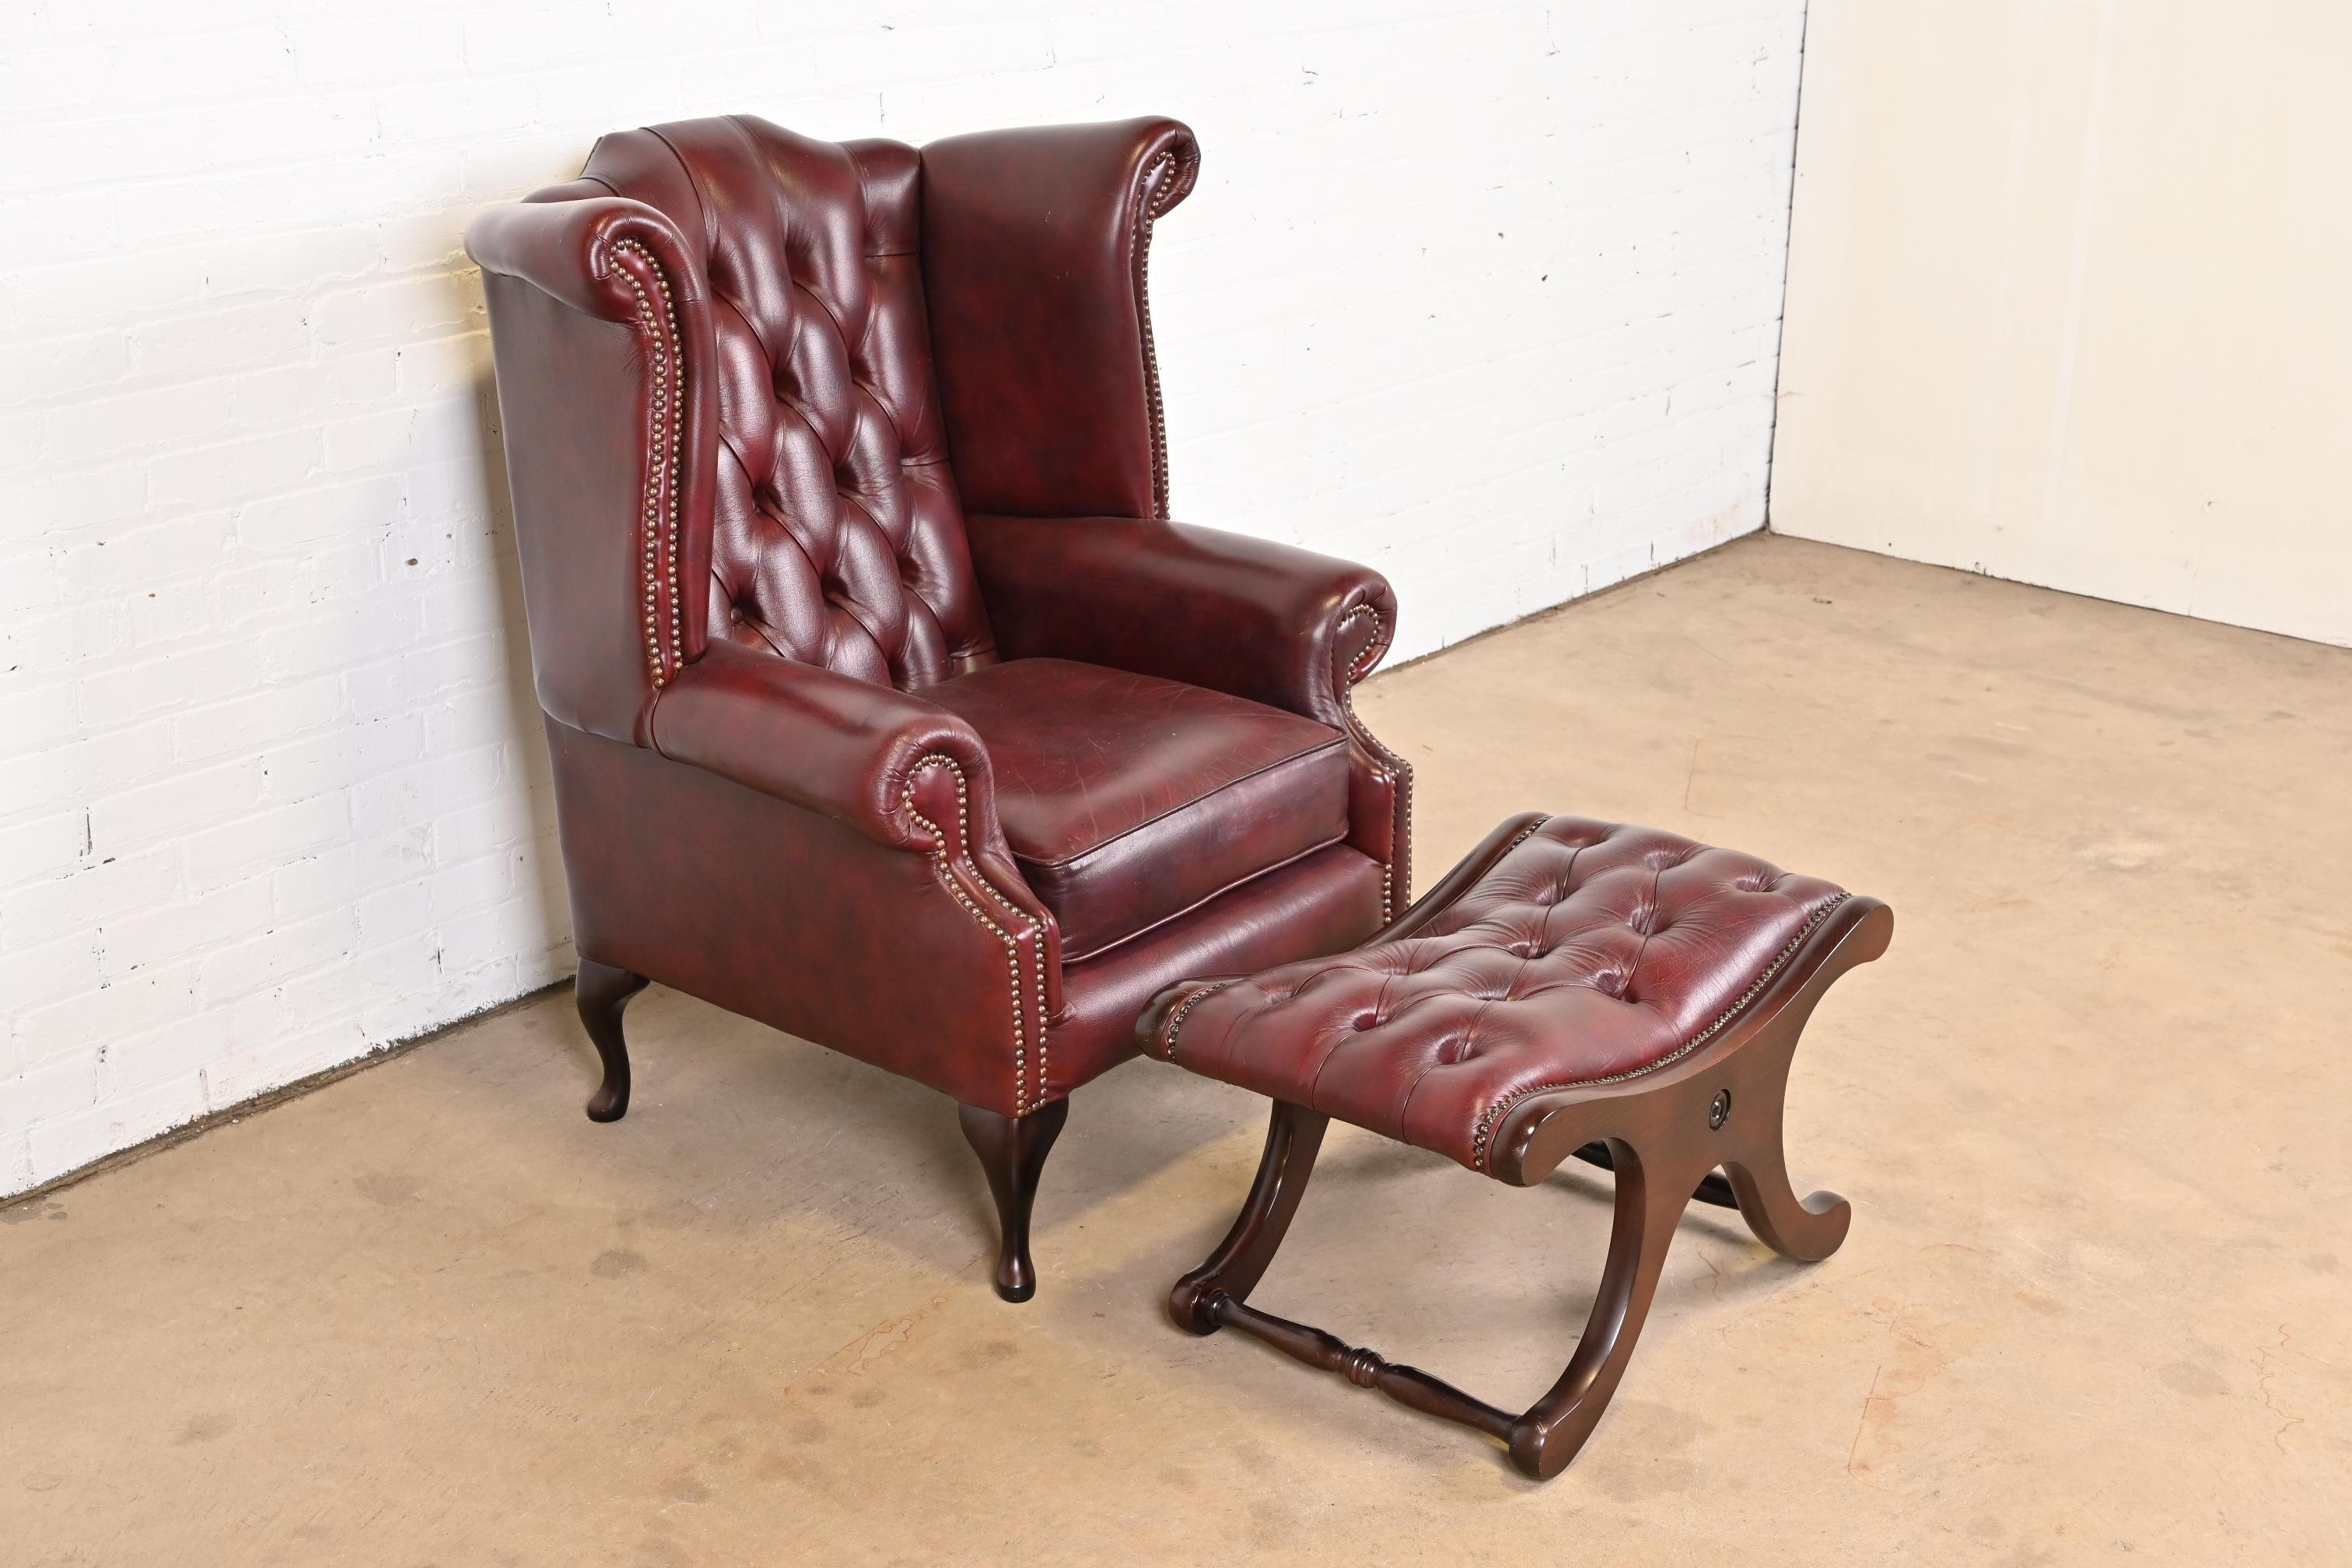 Vintage English Oxblood Leather Chesterfield Wingback Lounge Chair with Ottoman 1